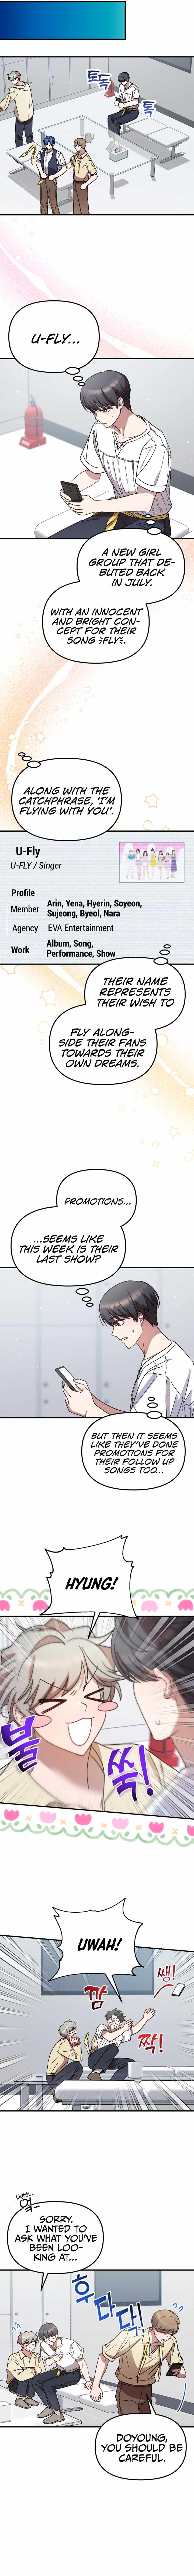 Top Star’s Talent Library Chapter 42-eng-li - Page 7